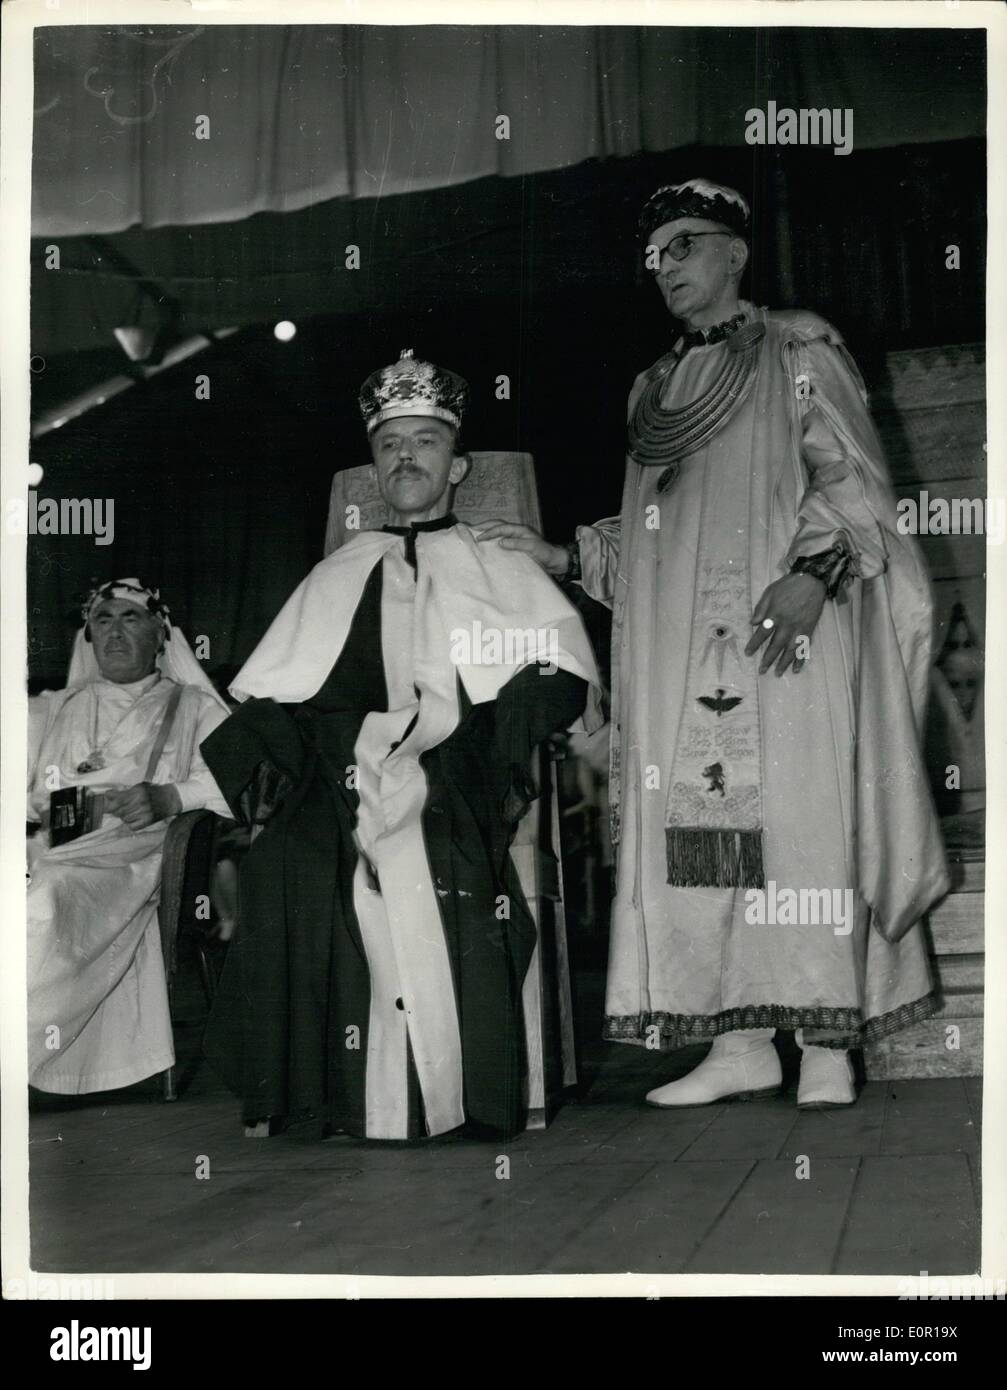 Aug. 08, 1957 - Bardic Crown Awarded To B.B.SC. Man At The Llangefni Eisteddfod.Mr. Dyfnallt Morgan, 40-year-old producer who is on the Welsh Staff of the B.B.C. at Bangor, was yesterday awarded the Bardic Crown at the Eisteddfod at Llangefni, for a verse play entitled ''Between Two''. Photo Shows Mr. Dyfnallt Morgan, seen after being crowned by the Arch-Druid. The Rev. William Morris, at Llangefni yesterday. Stock Photo